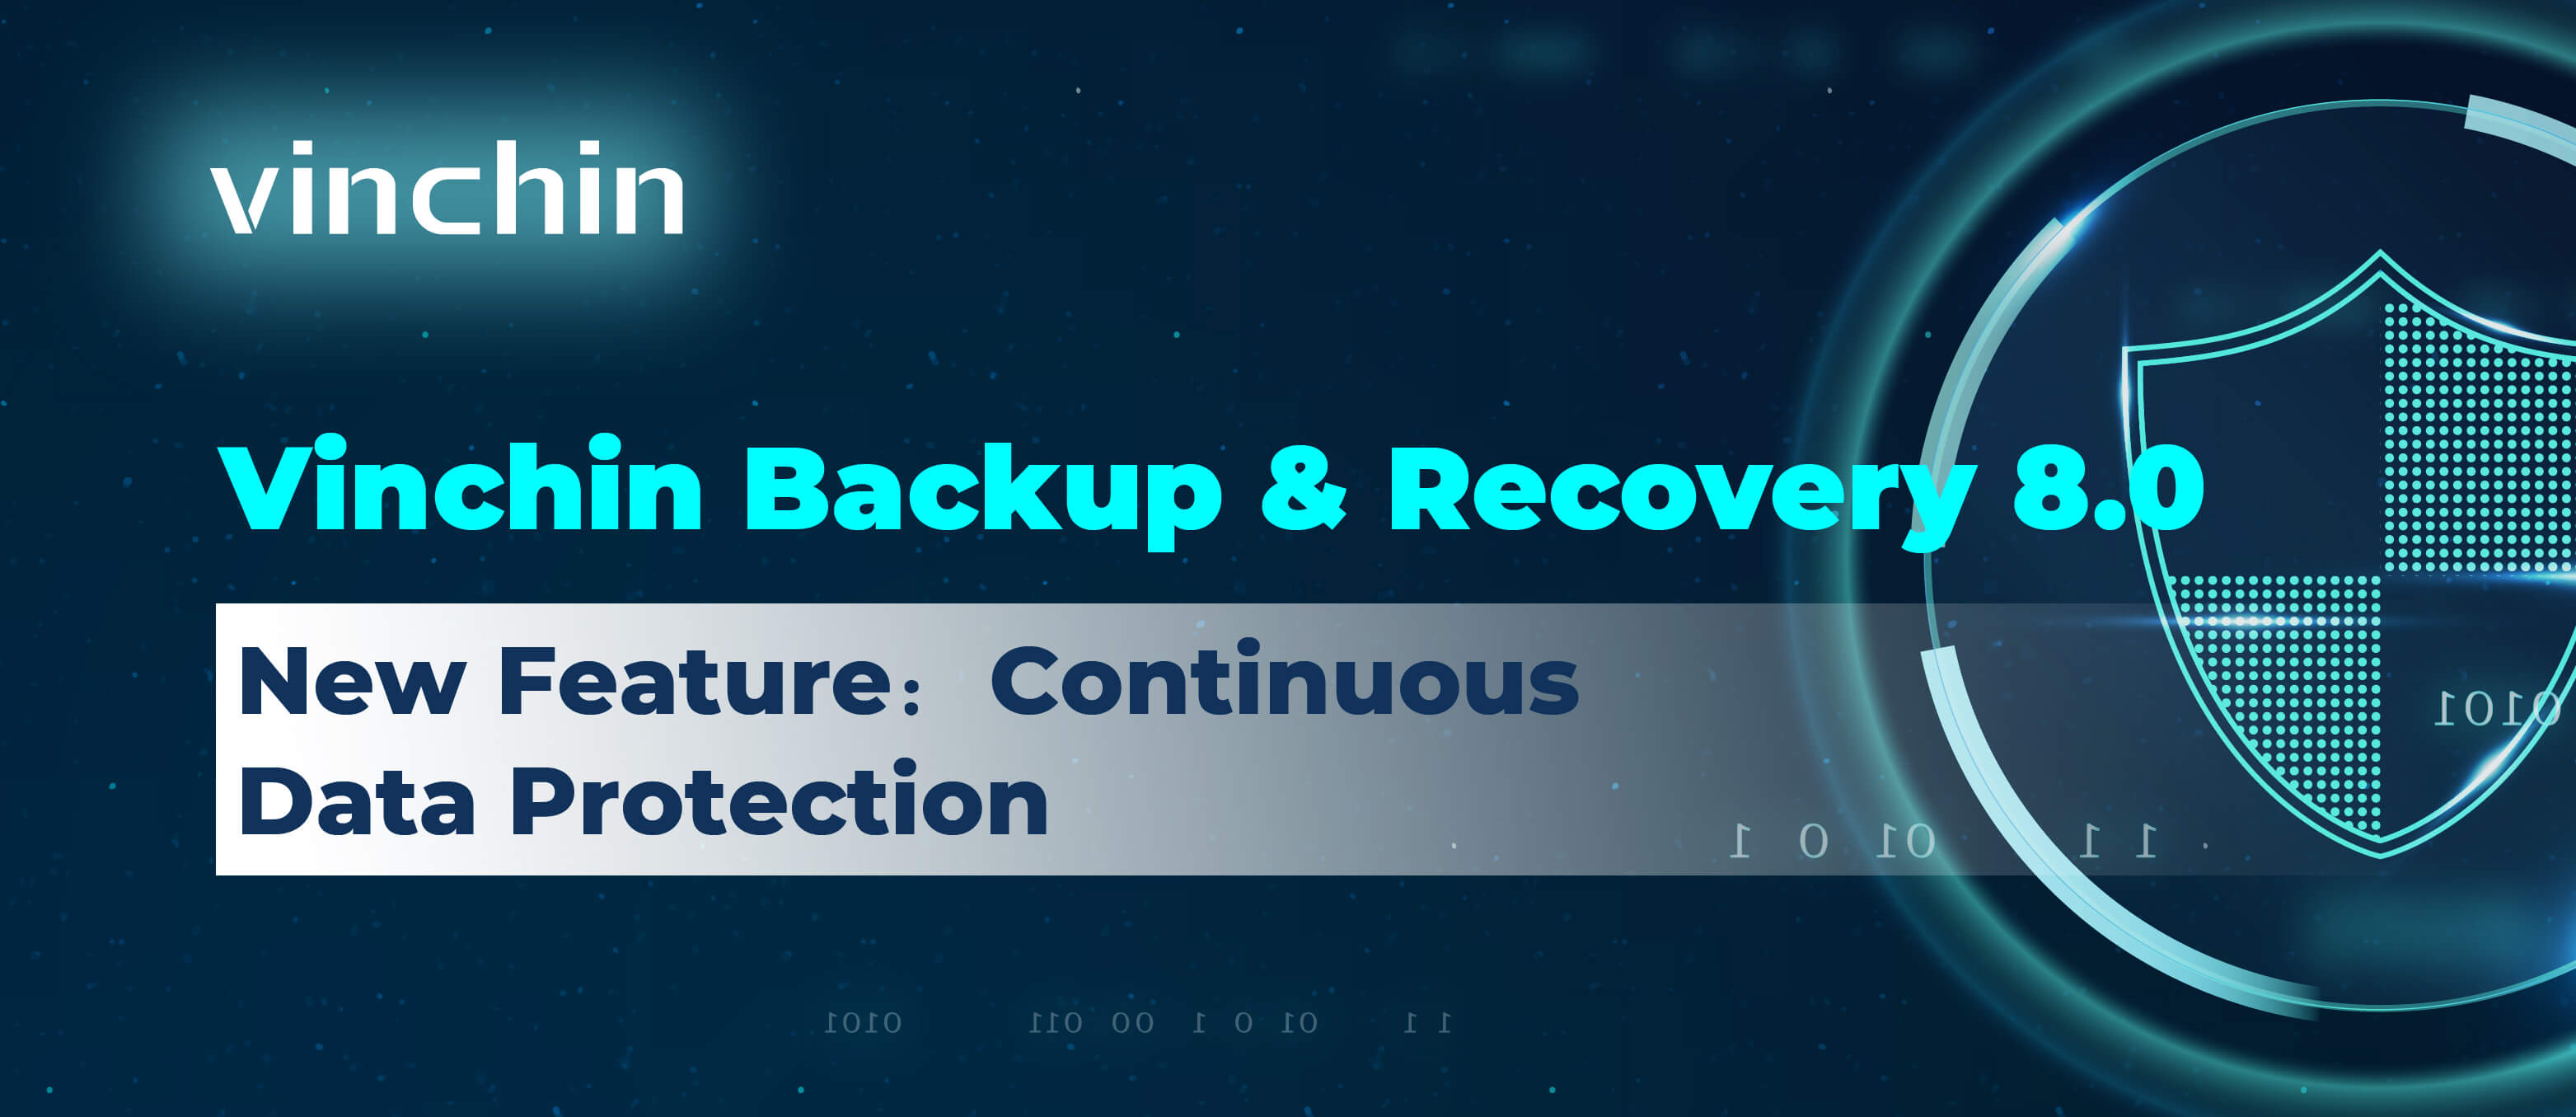 vinchin, backup, recovery, archive, vinchin backup & recovery 8.0, cdp,agentless aws ec2 backup, exchange, cloud, data protection